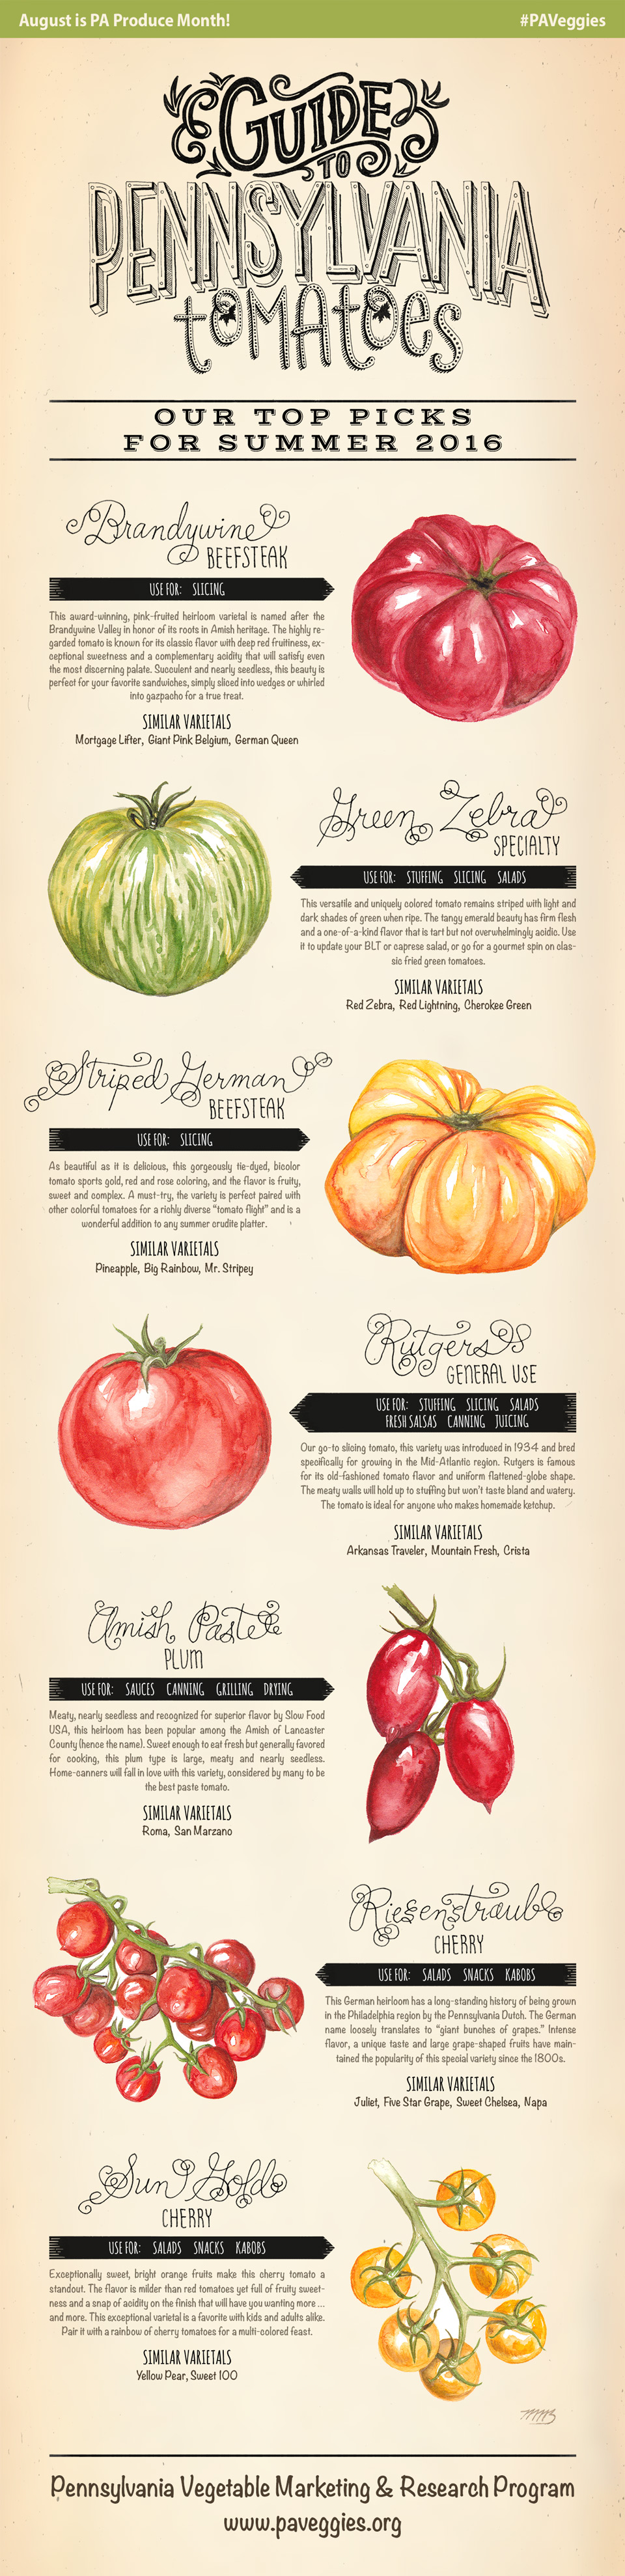 Guide to PA Tomatoes: Our Top Picks for Summer 2016